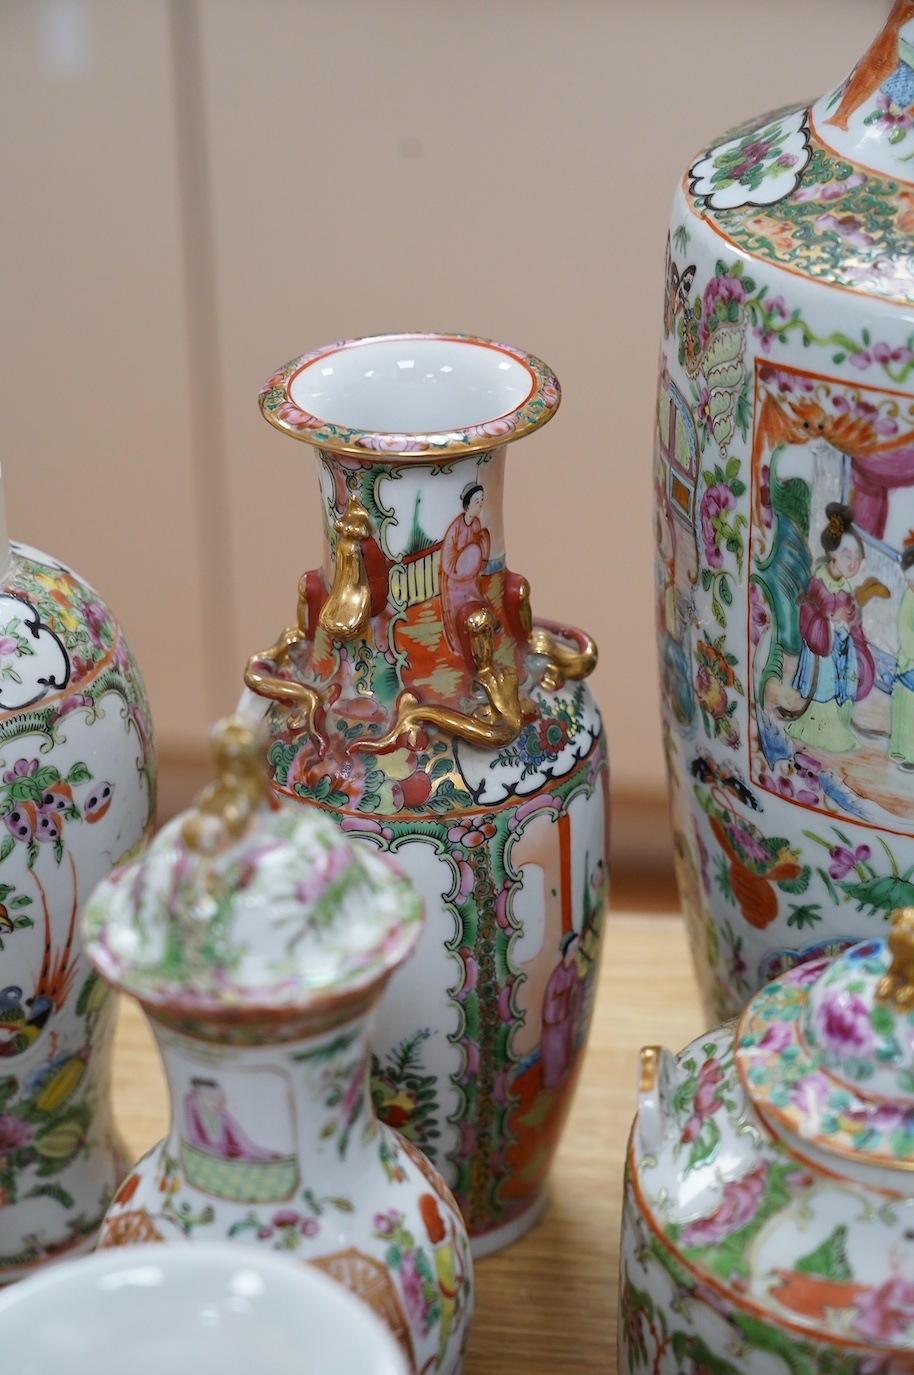 A group of 19th century and later Chinese famille rose porcelain vases and teapots, tallest 39cm high. Condition - poor